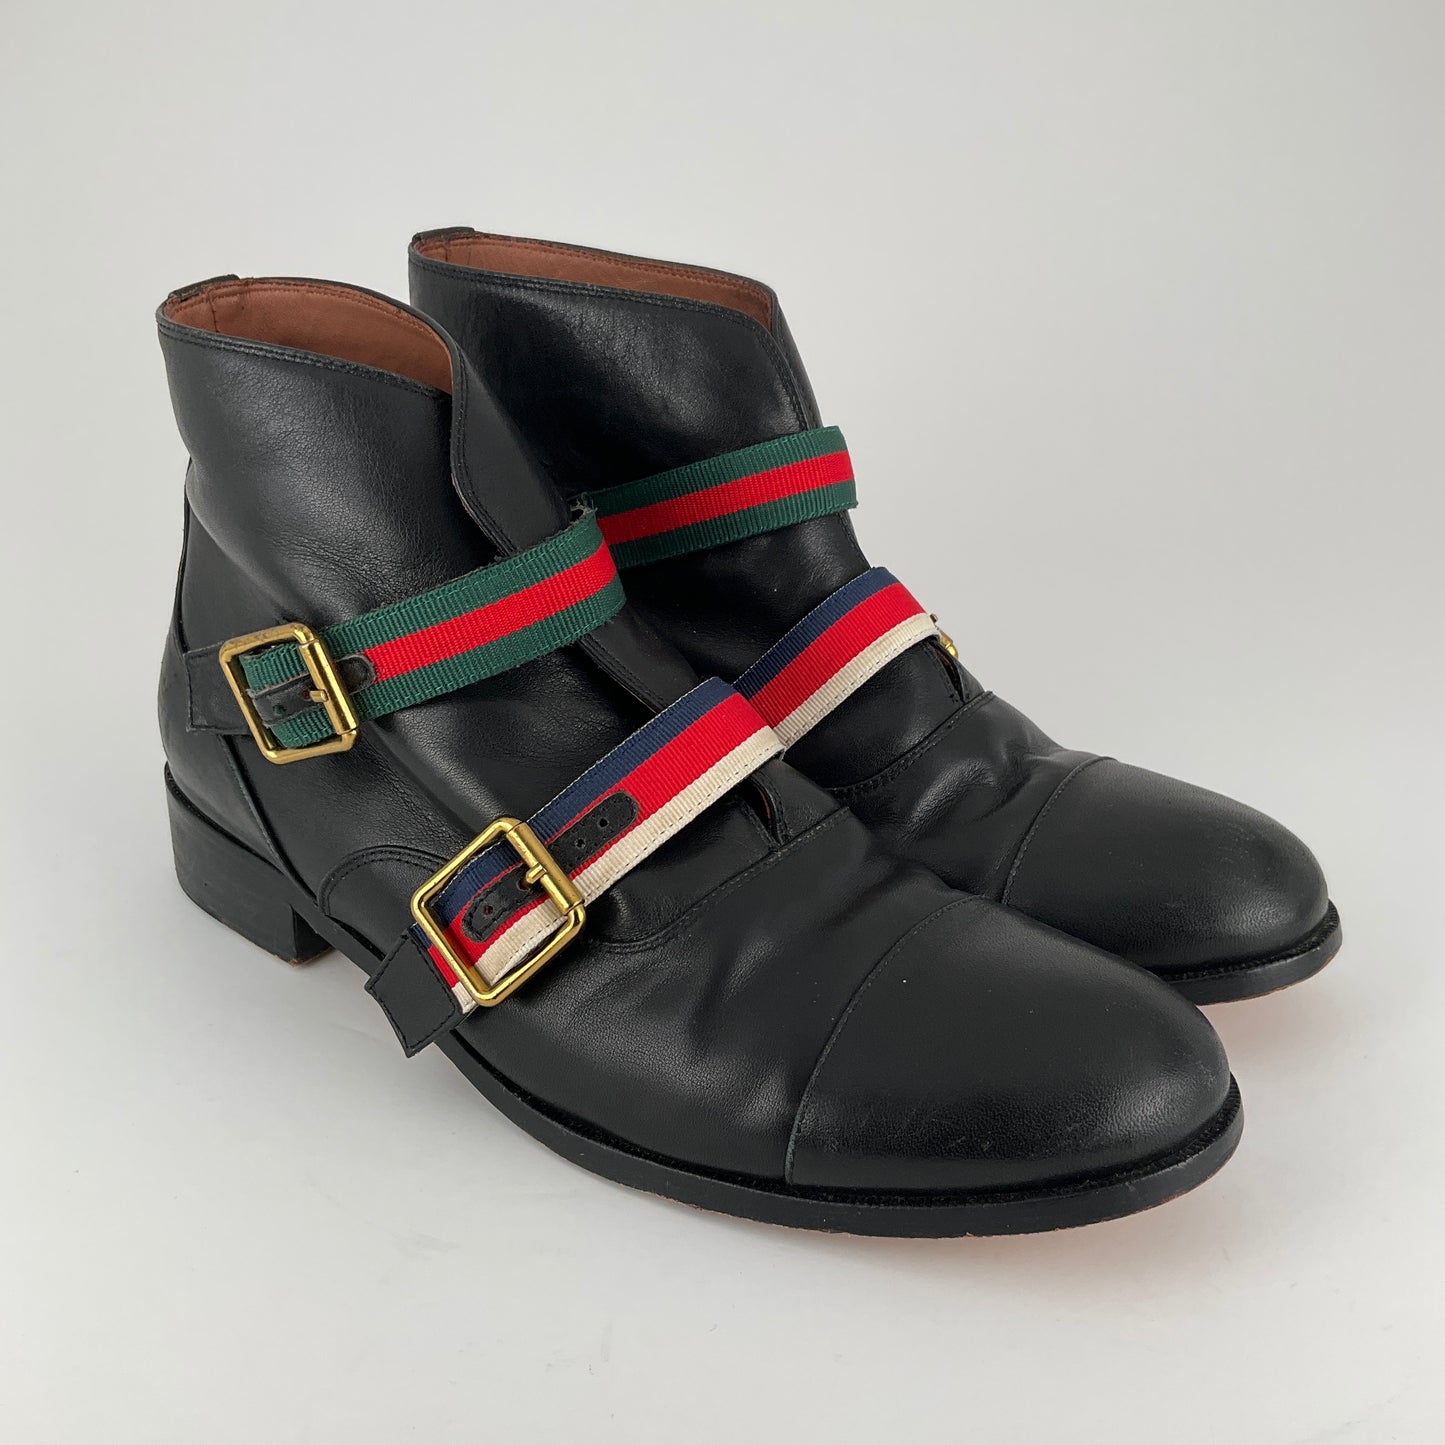 Gucci - Ankle Boot - Size 38